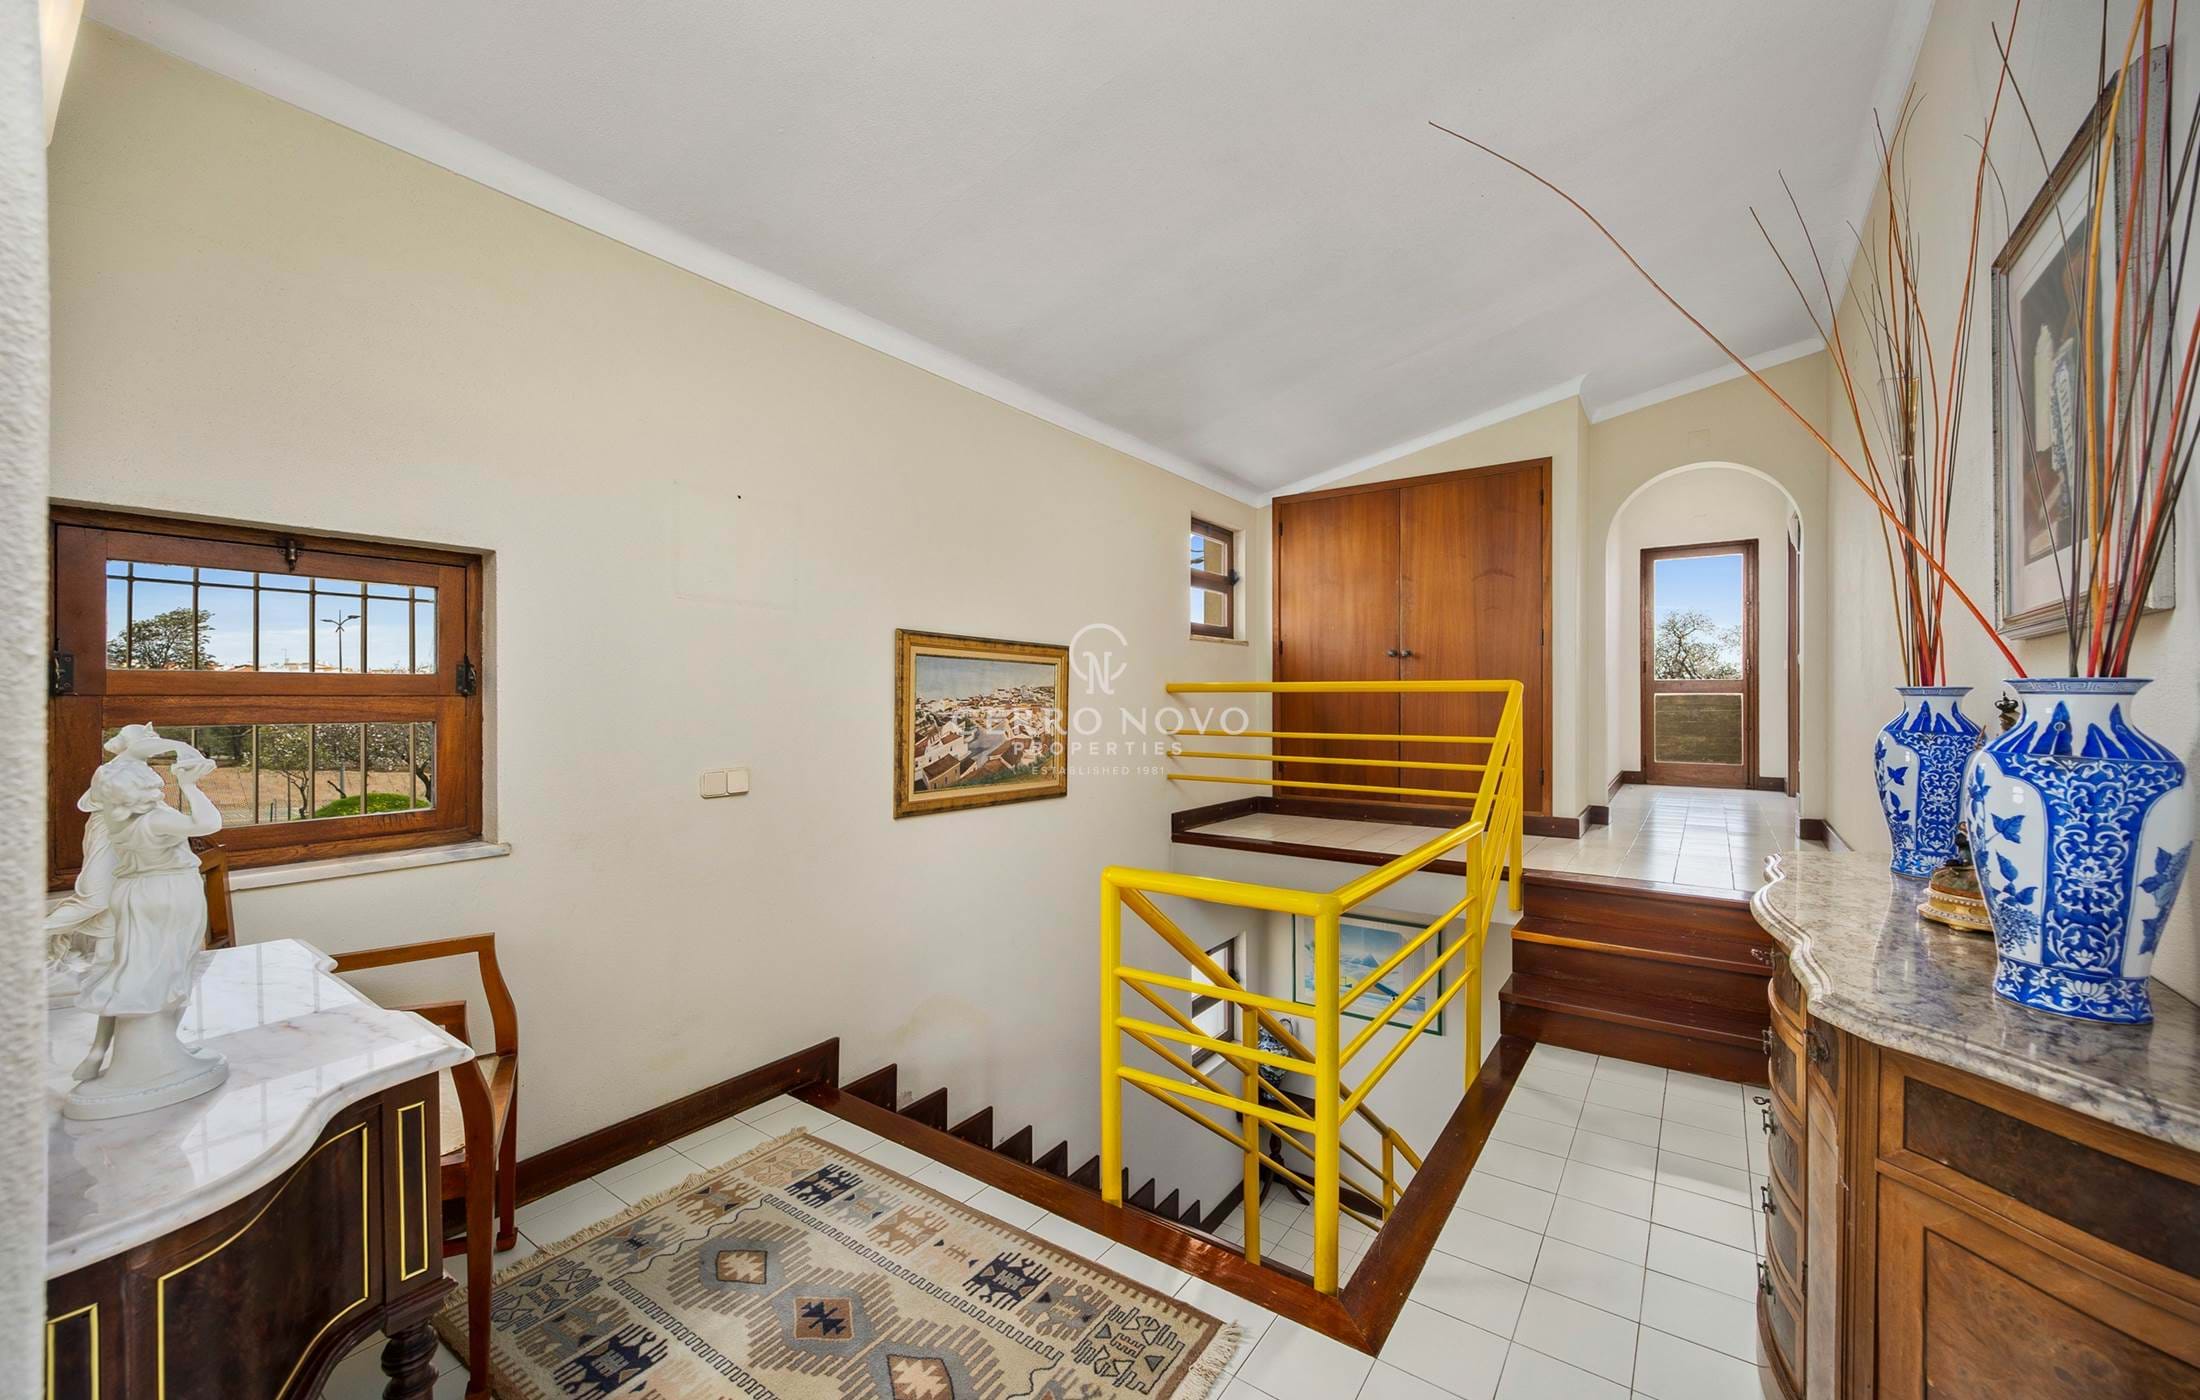 Two plots with 3 + 1 bedroom villa, garage and annex in the heart of the city